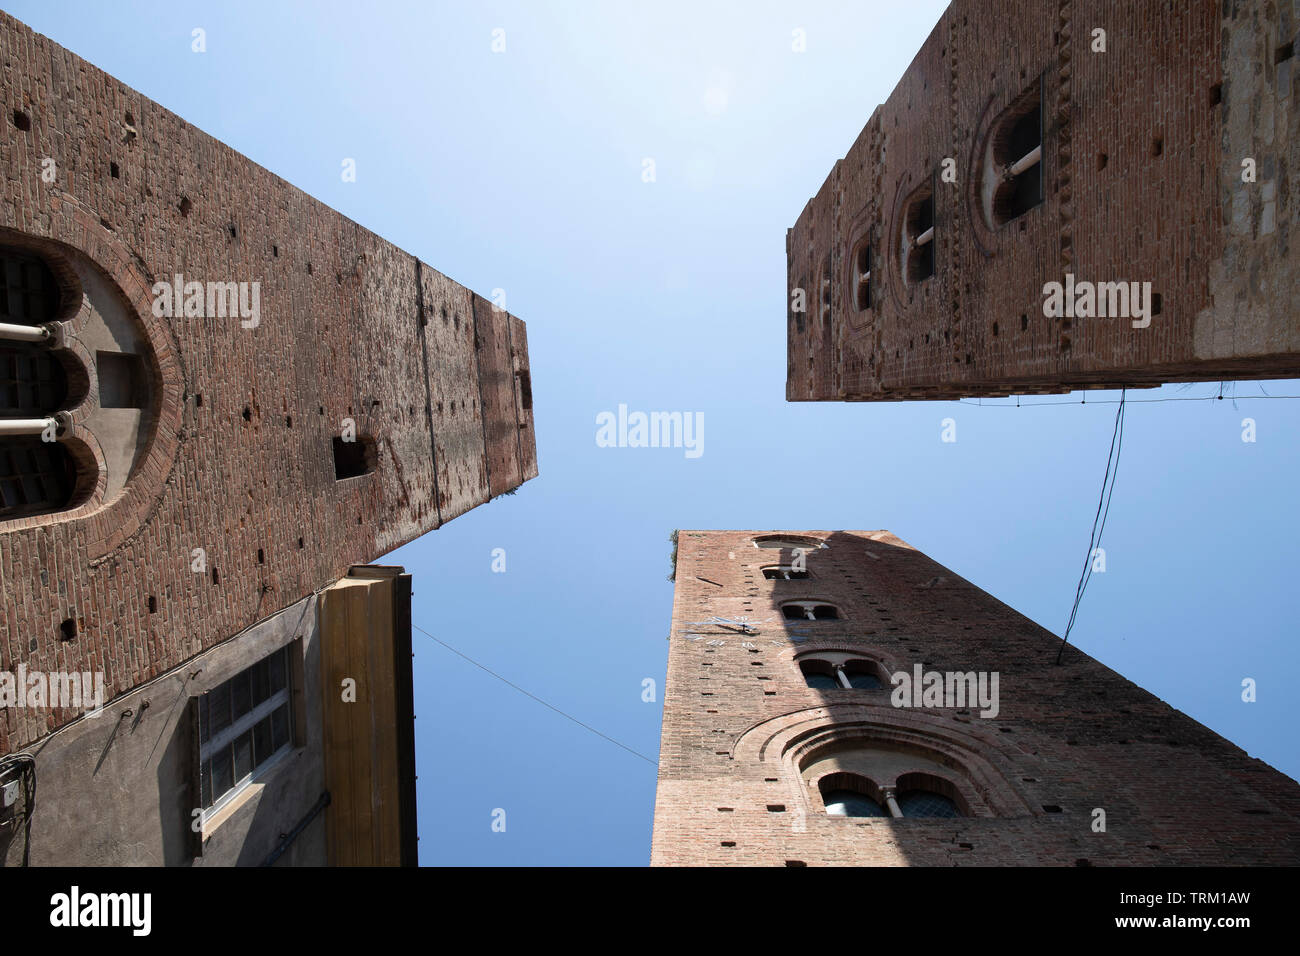 The three towers, symbol of the town of Albenga, Liguria, Italy. Blue sky, down-top perspective. Stock Photo